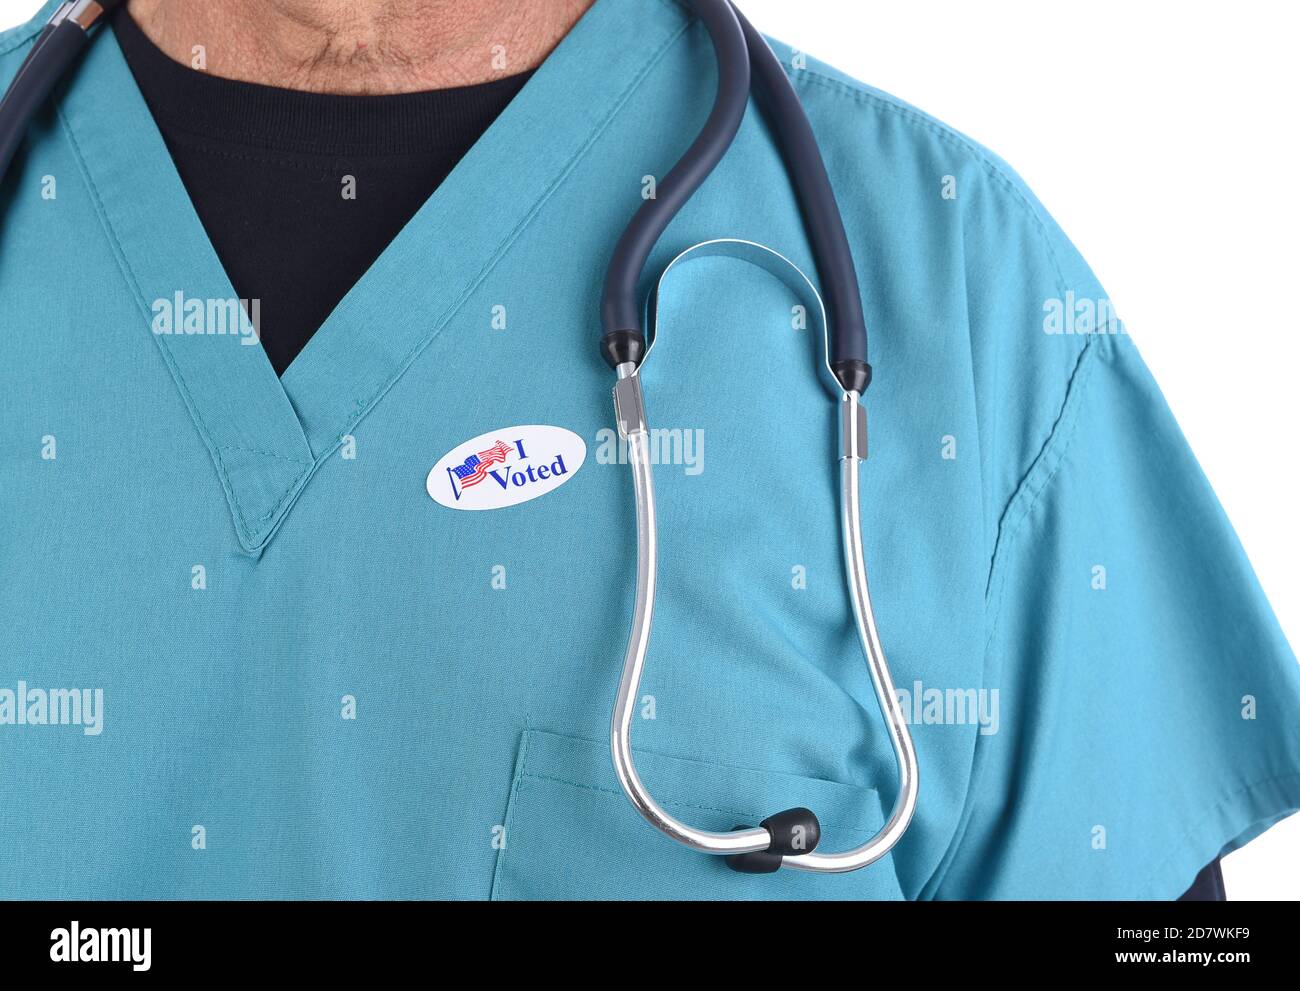 Closeup of a doctor with an I Voted sticker on his surgical scrubs. Stock Photo